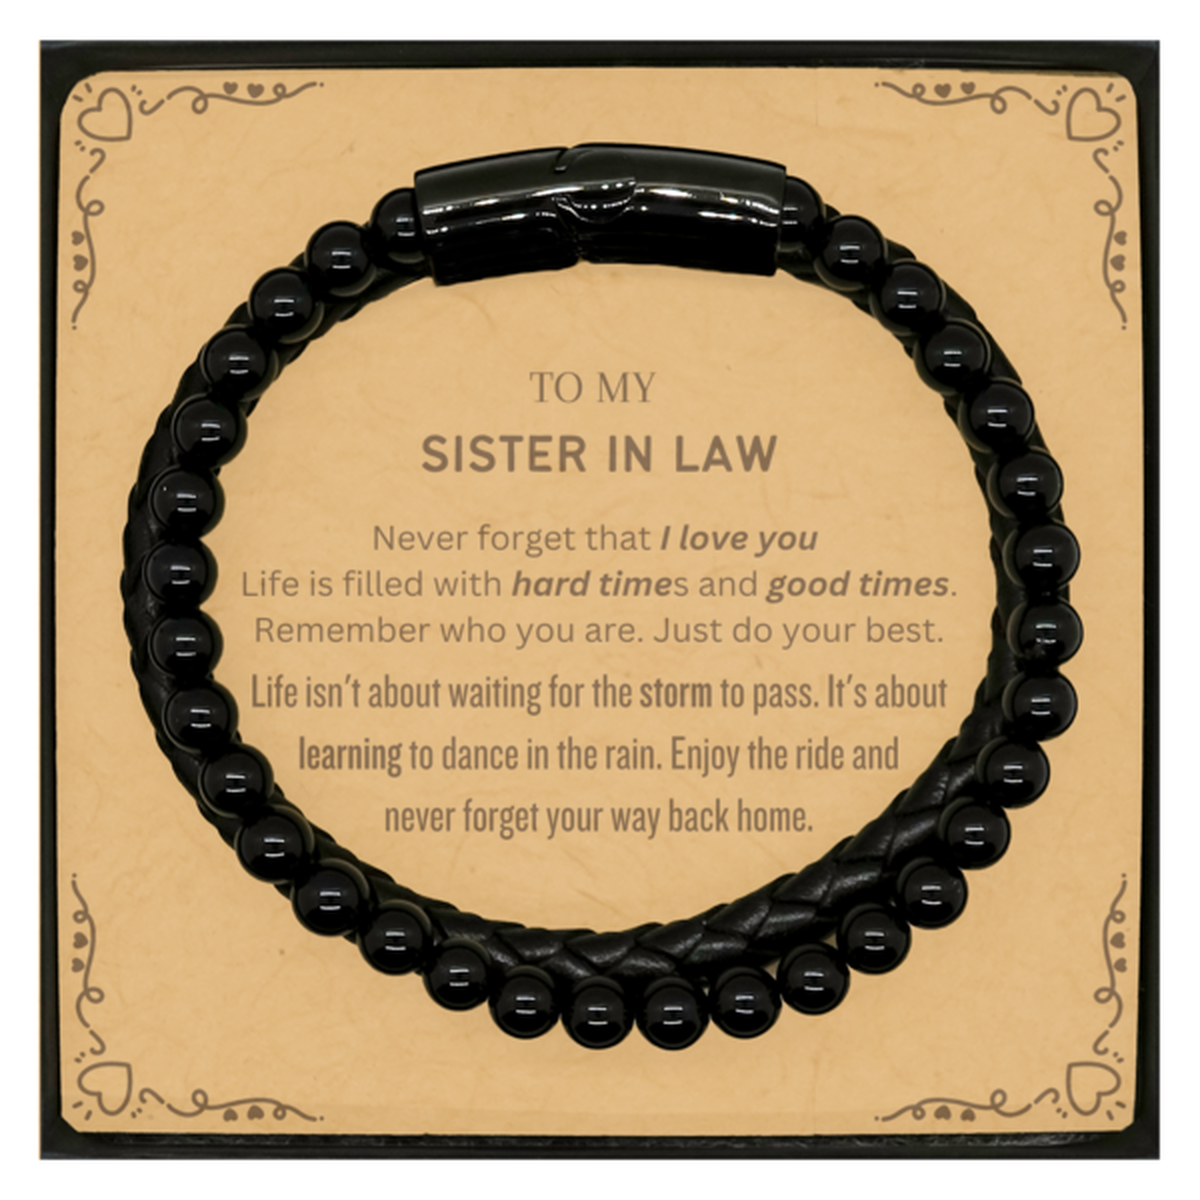 Christmas Sister In Law Stone Leather Bracelets Gifts, To My Sister In Law Birthday Thank You Gifts For Sister In Law, Graduation Unique Gifts For Sister In Law To My Sister In Law Never forget that I love you life is filled with hard times and good times